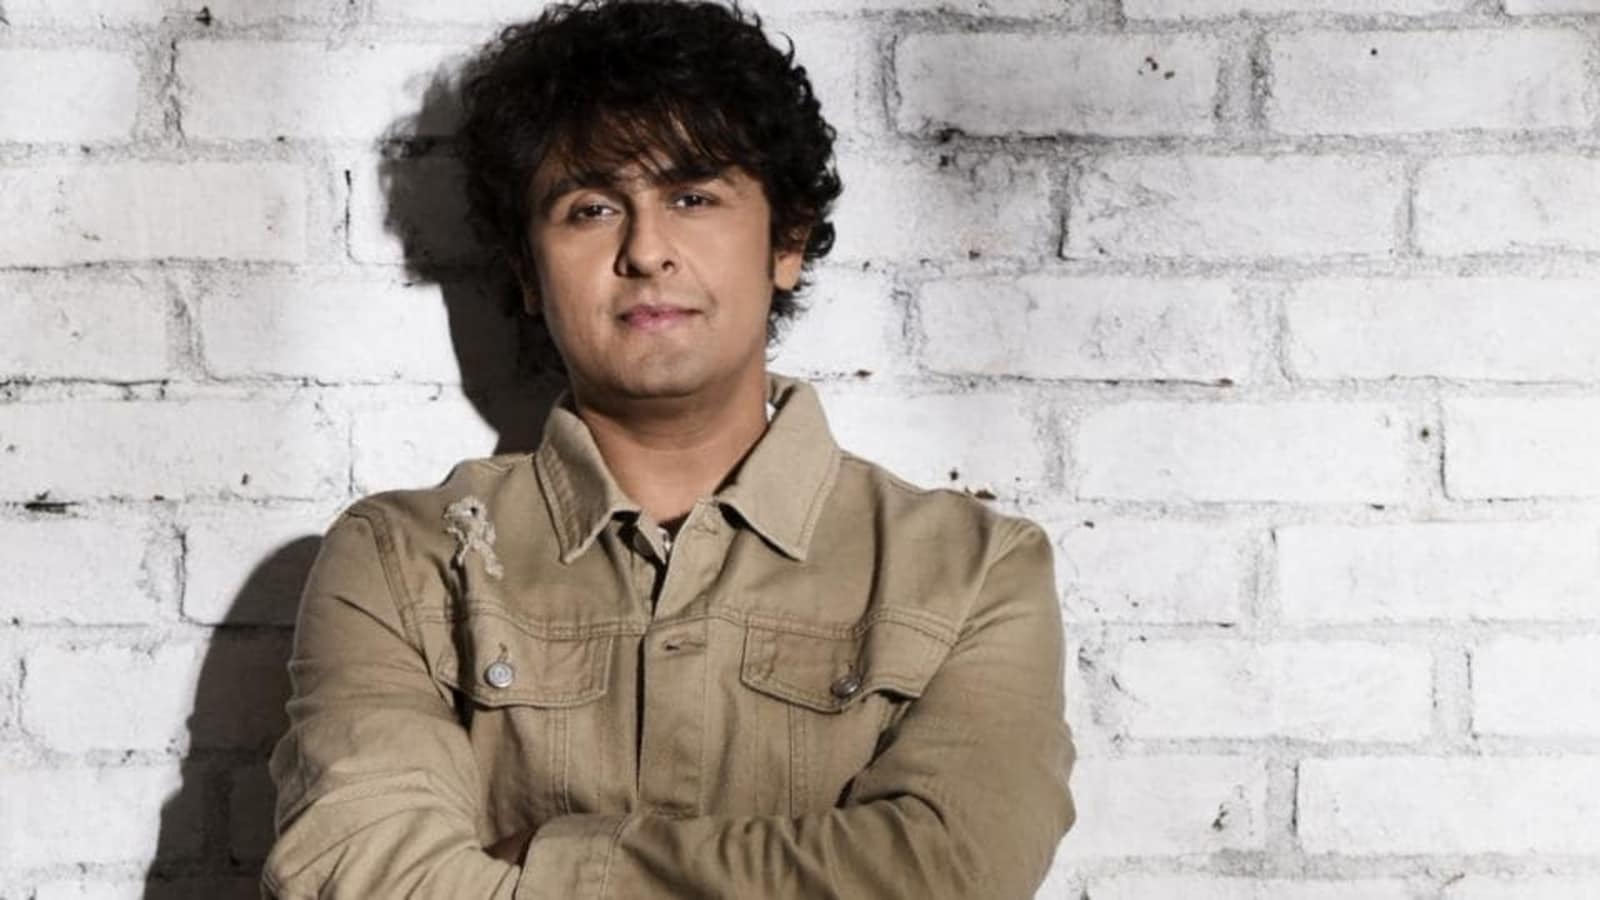 Sonu Nigam Warns Fans Against Con Artist Promising “Personal Conversation” With The SingerAgainst Con Artist Promising “Personal Conversation” With The Singer